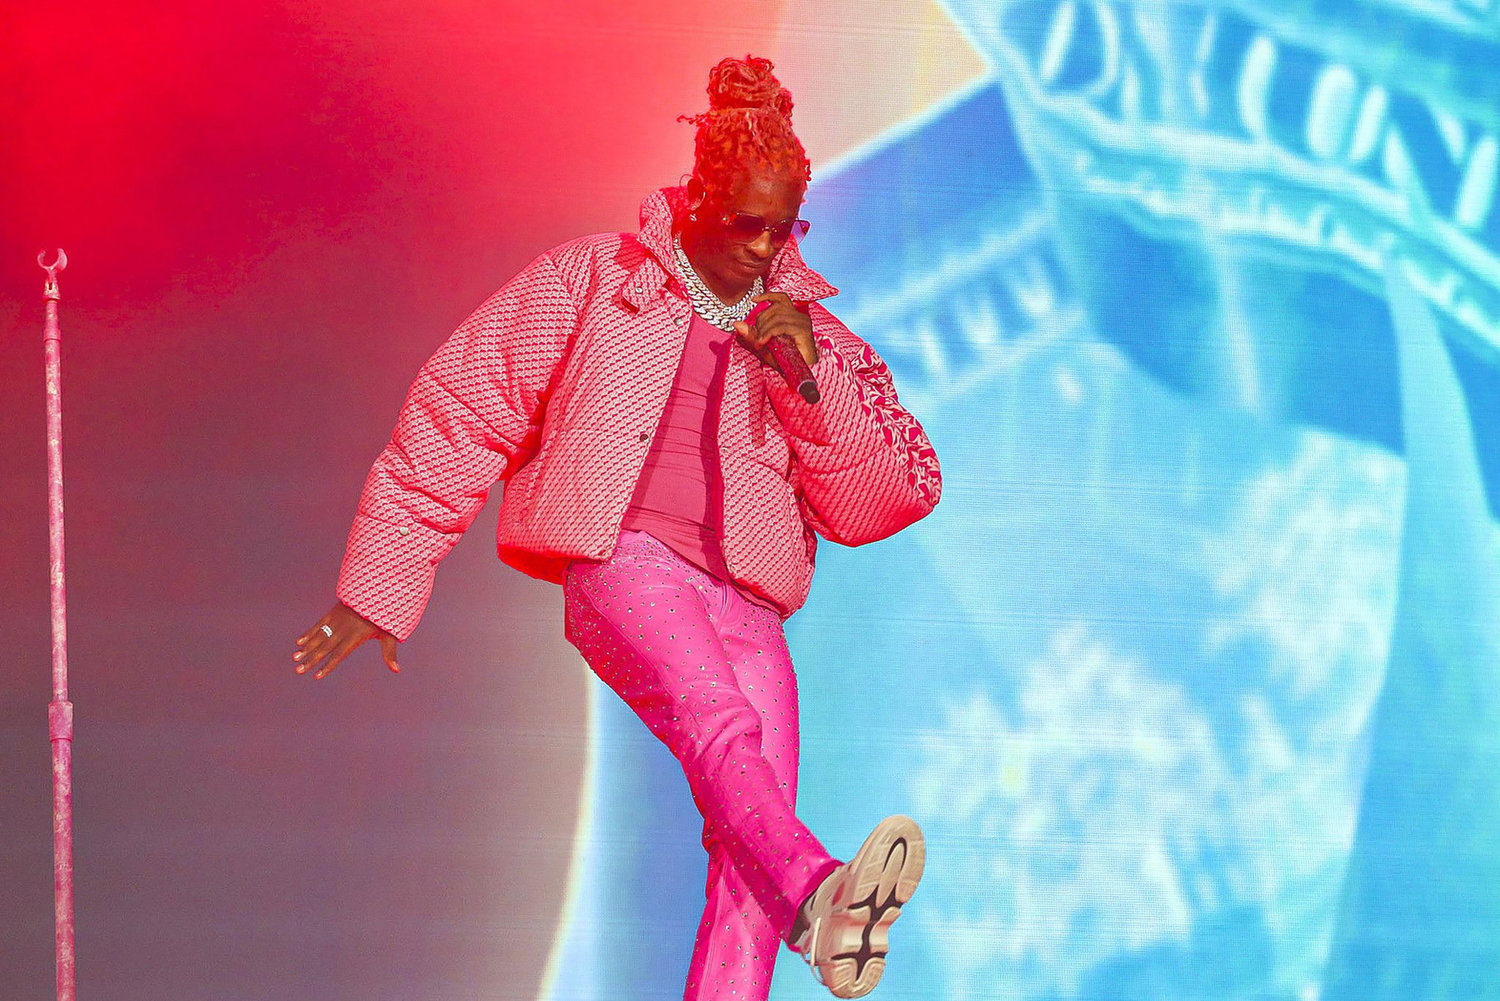 Young Thug performs at the Bud Light Seltzer stage during the final day of Lollapalooza on Aug. 1, 2021. Atlanta prosecutors are using his lyrics in court as they press gang-related charges against him. (Vashon Jordan Jr./Chicago Tribune/TNS)